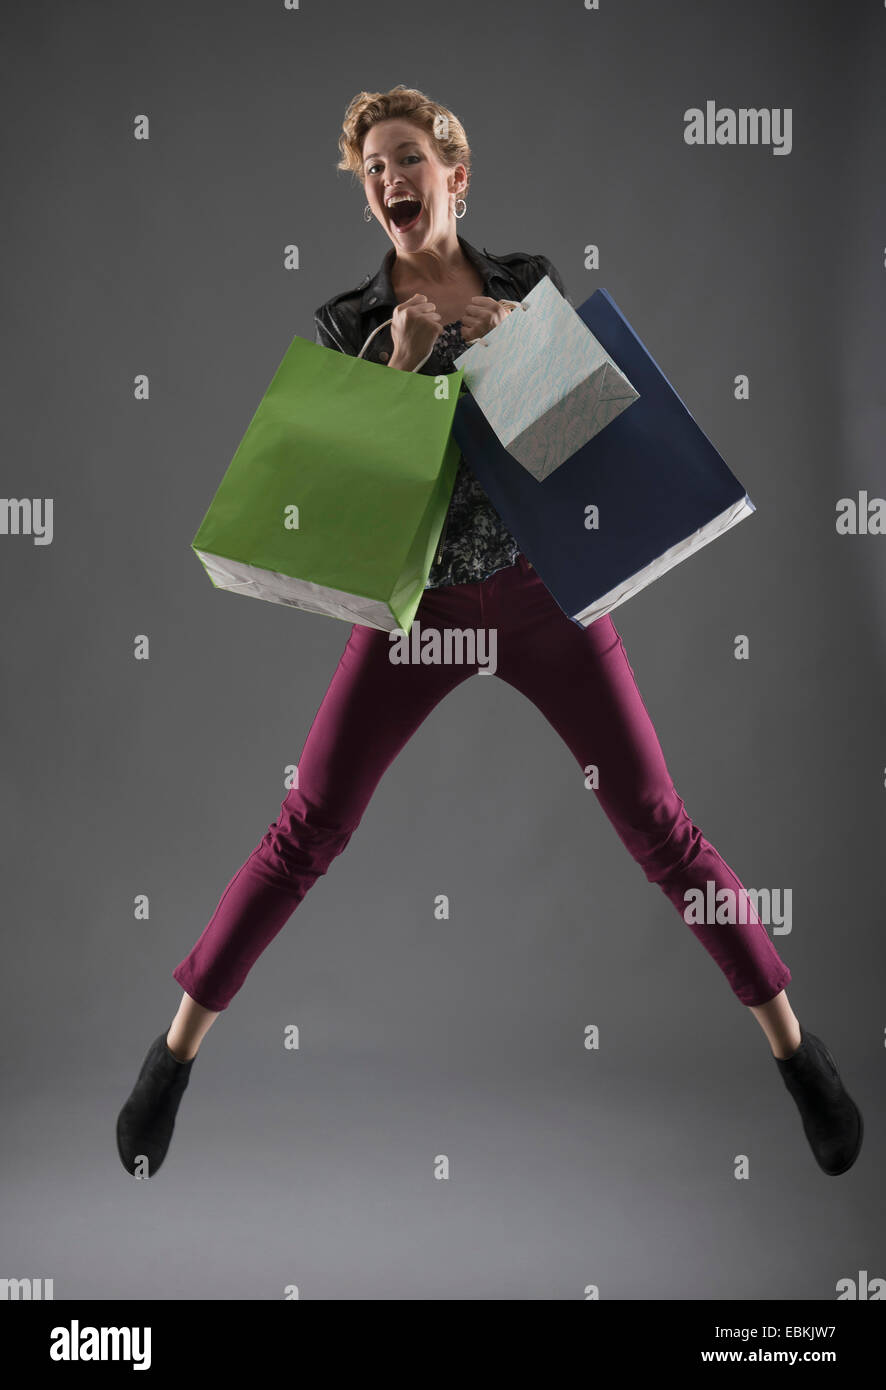 Studio shot of woman jumping with shopping bags Stock Photo